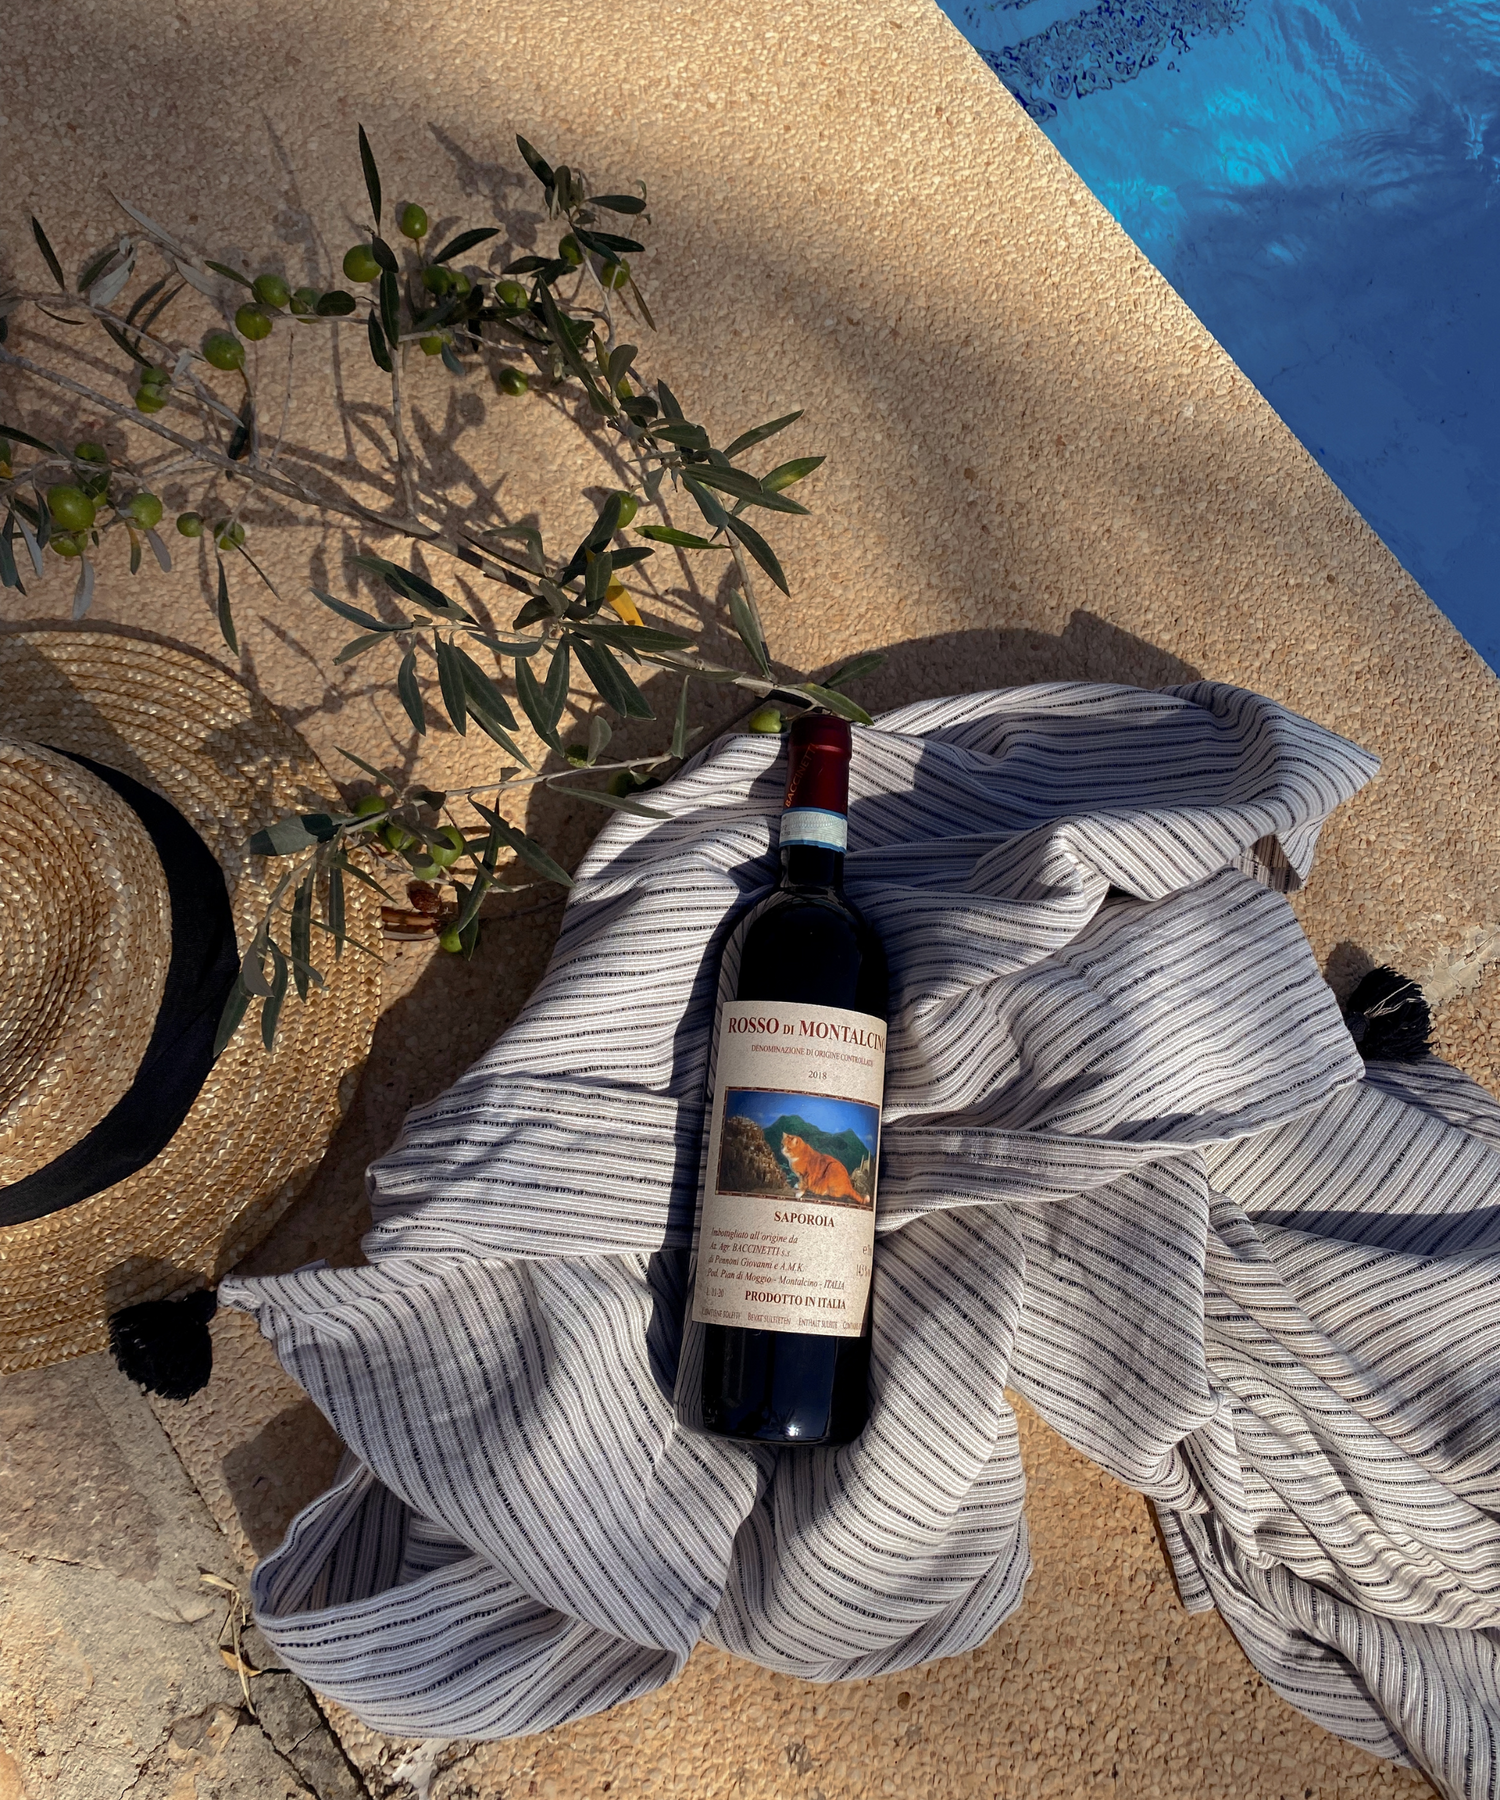 Bottle Rosso di Montalcino on the ground next to pool